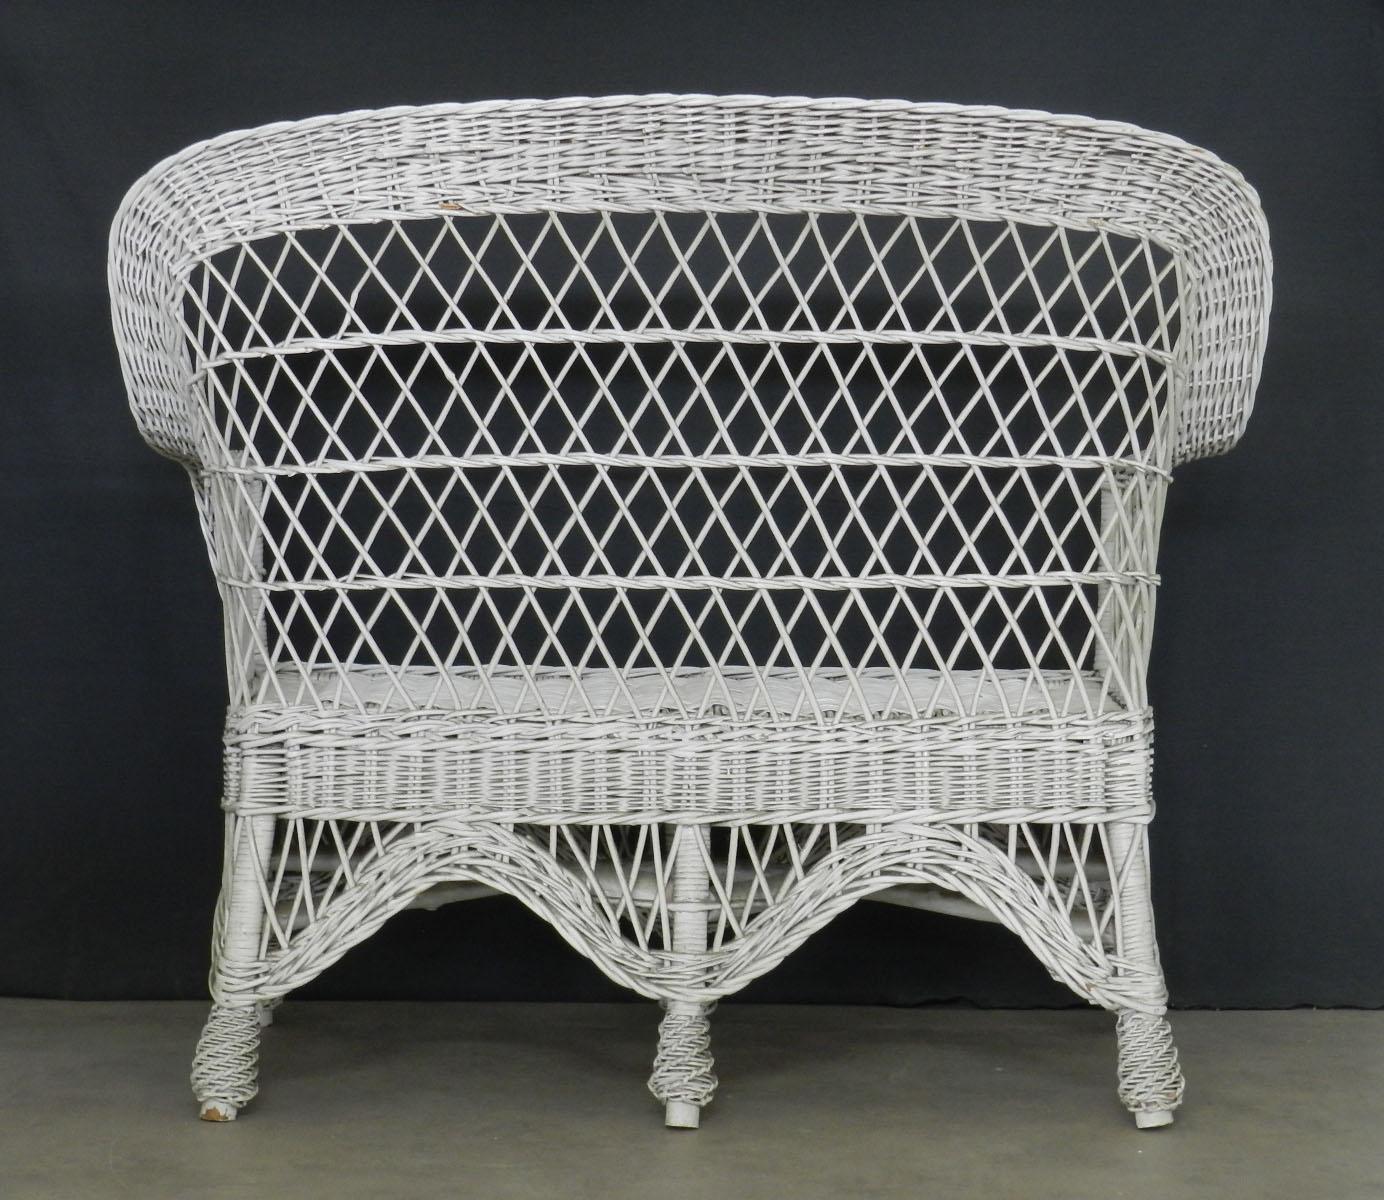 Mid-Century Modern Midcentury Cane Sofa Woven White Wicker Conservatory Patio Settee, French